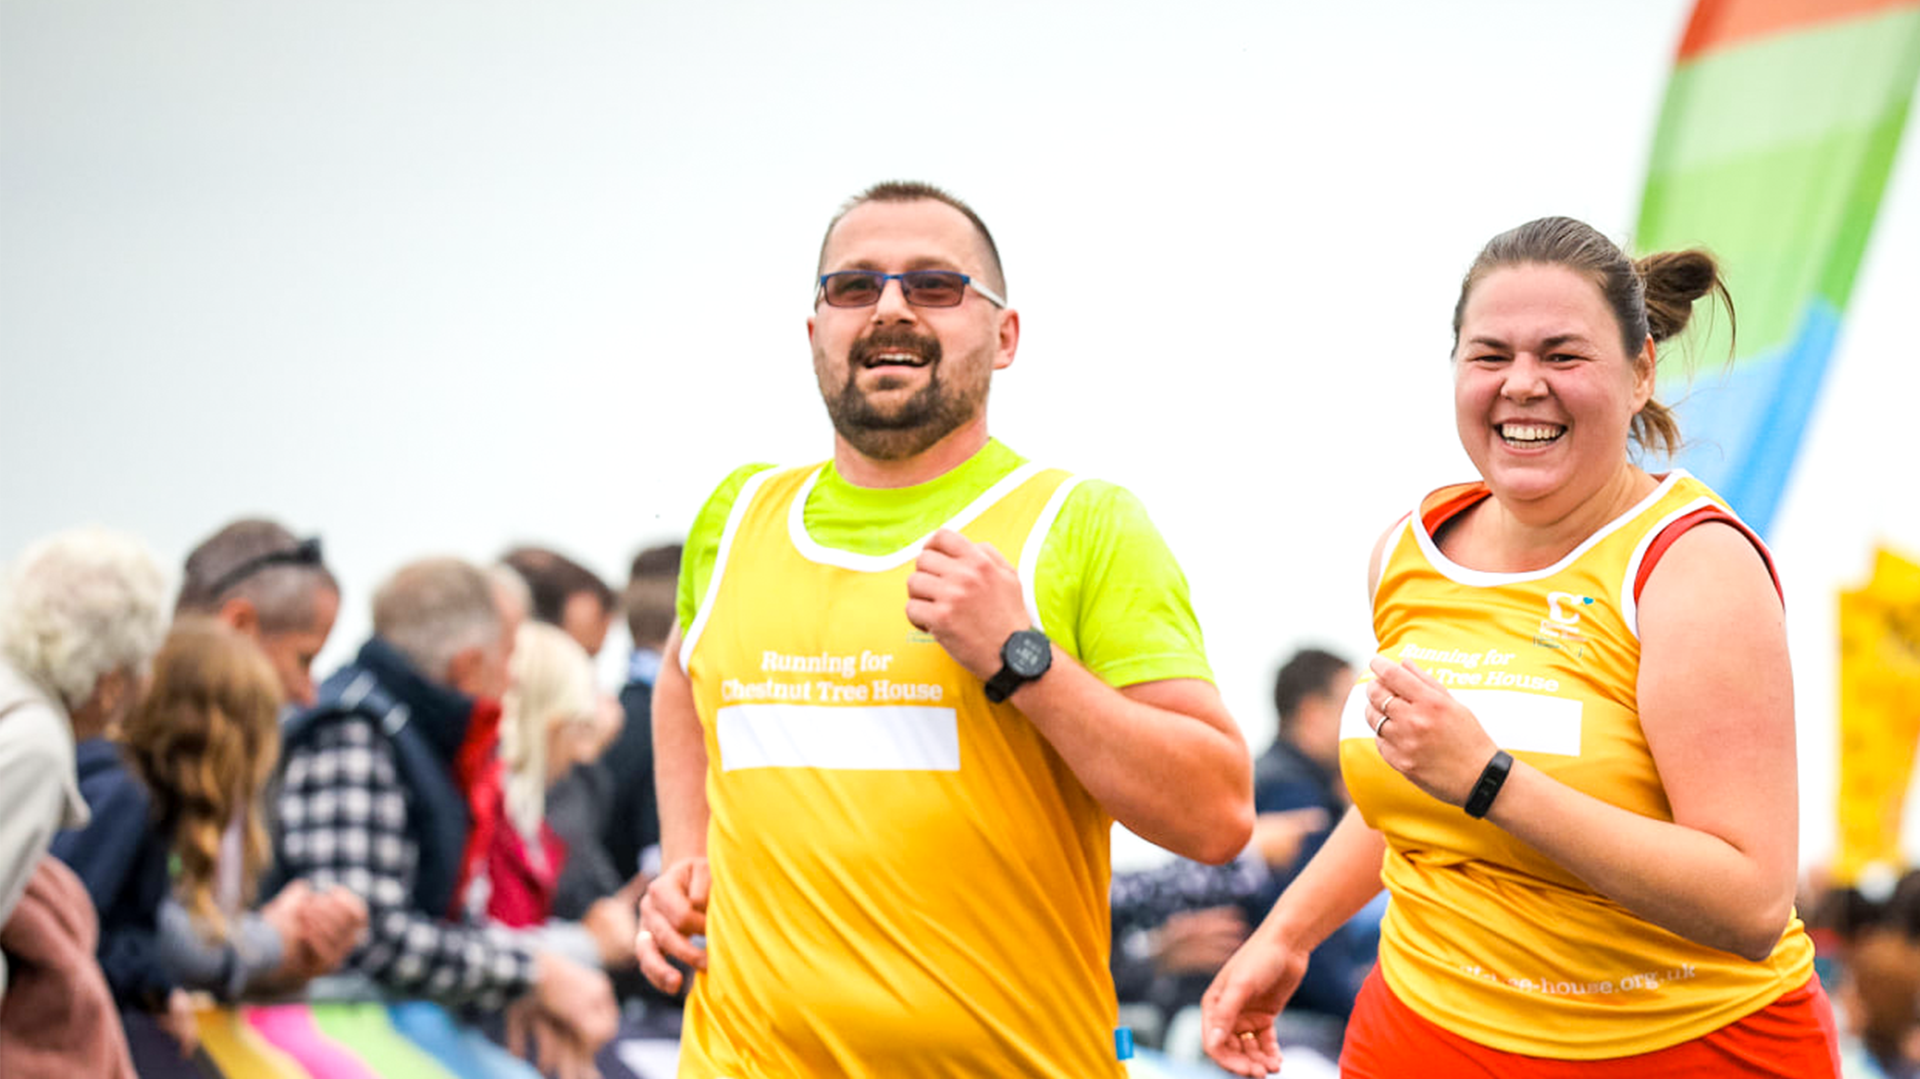 A man and a woman wearing Chestnut Tree House running vests race to the finish line of the Worthing 10k.